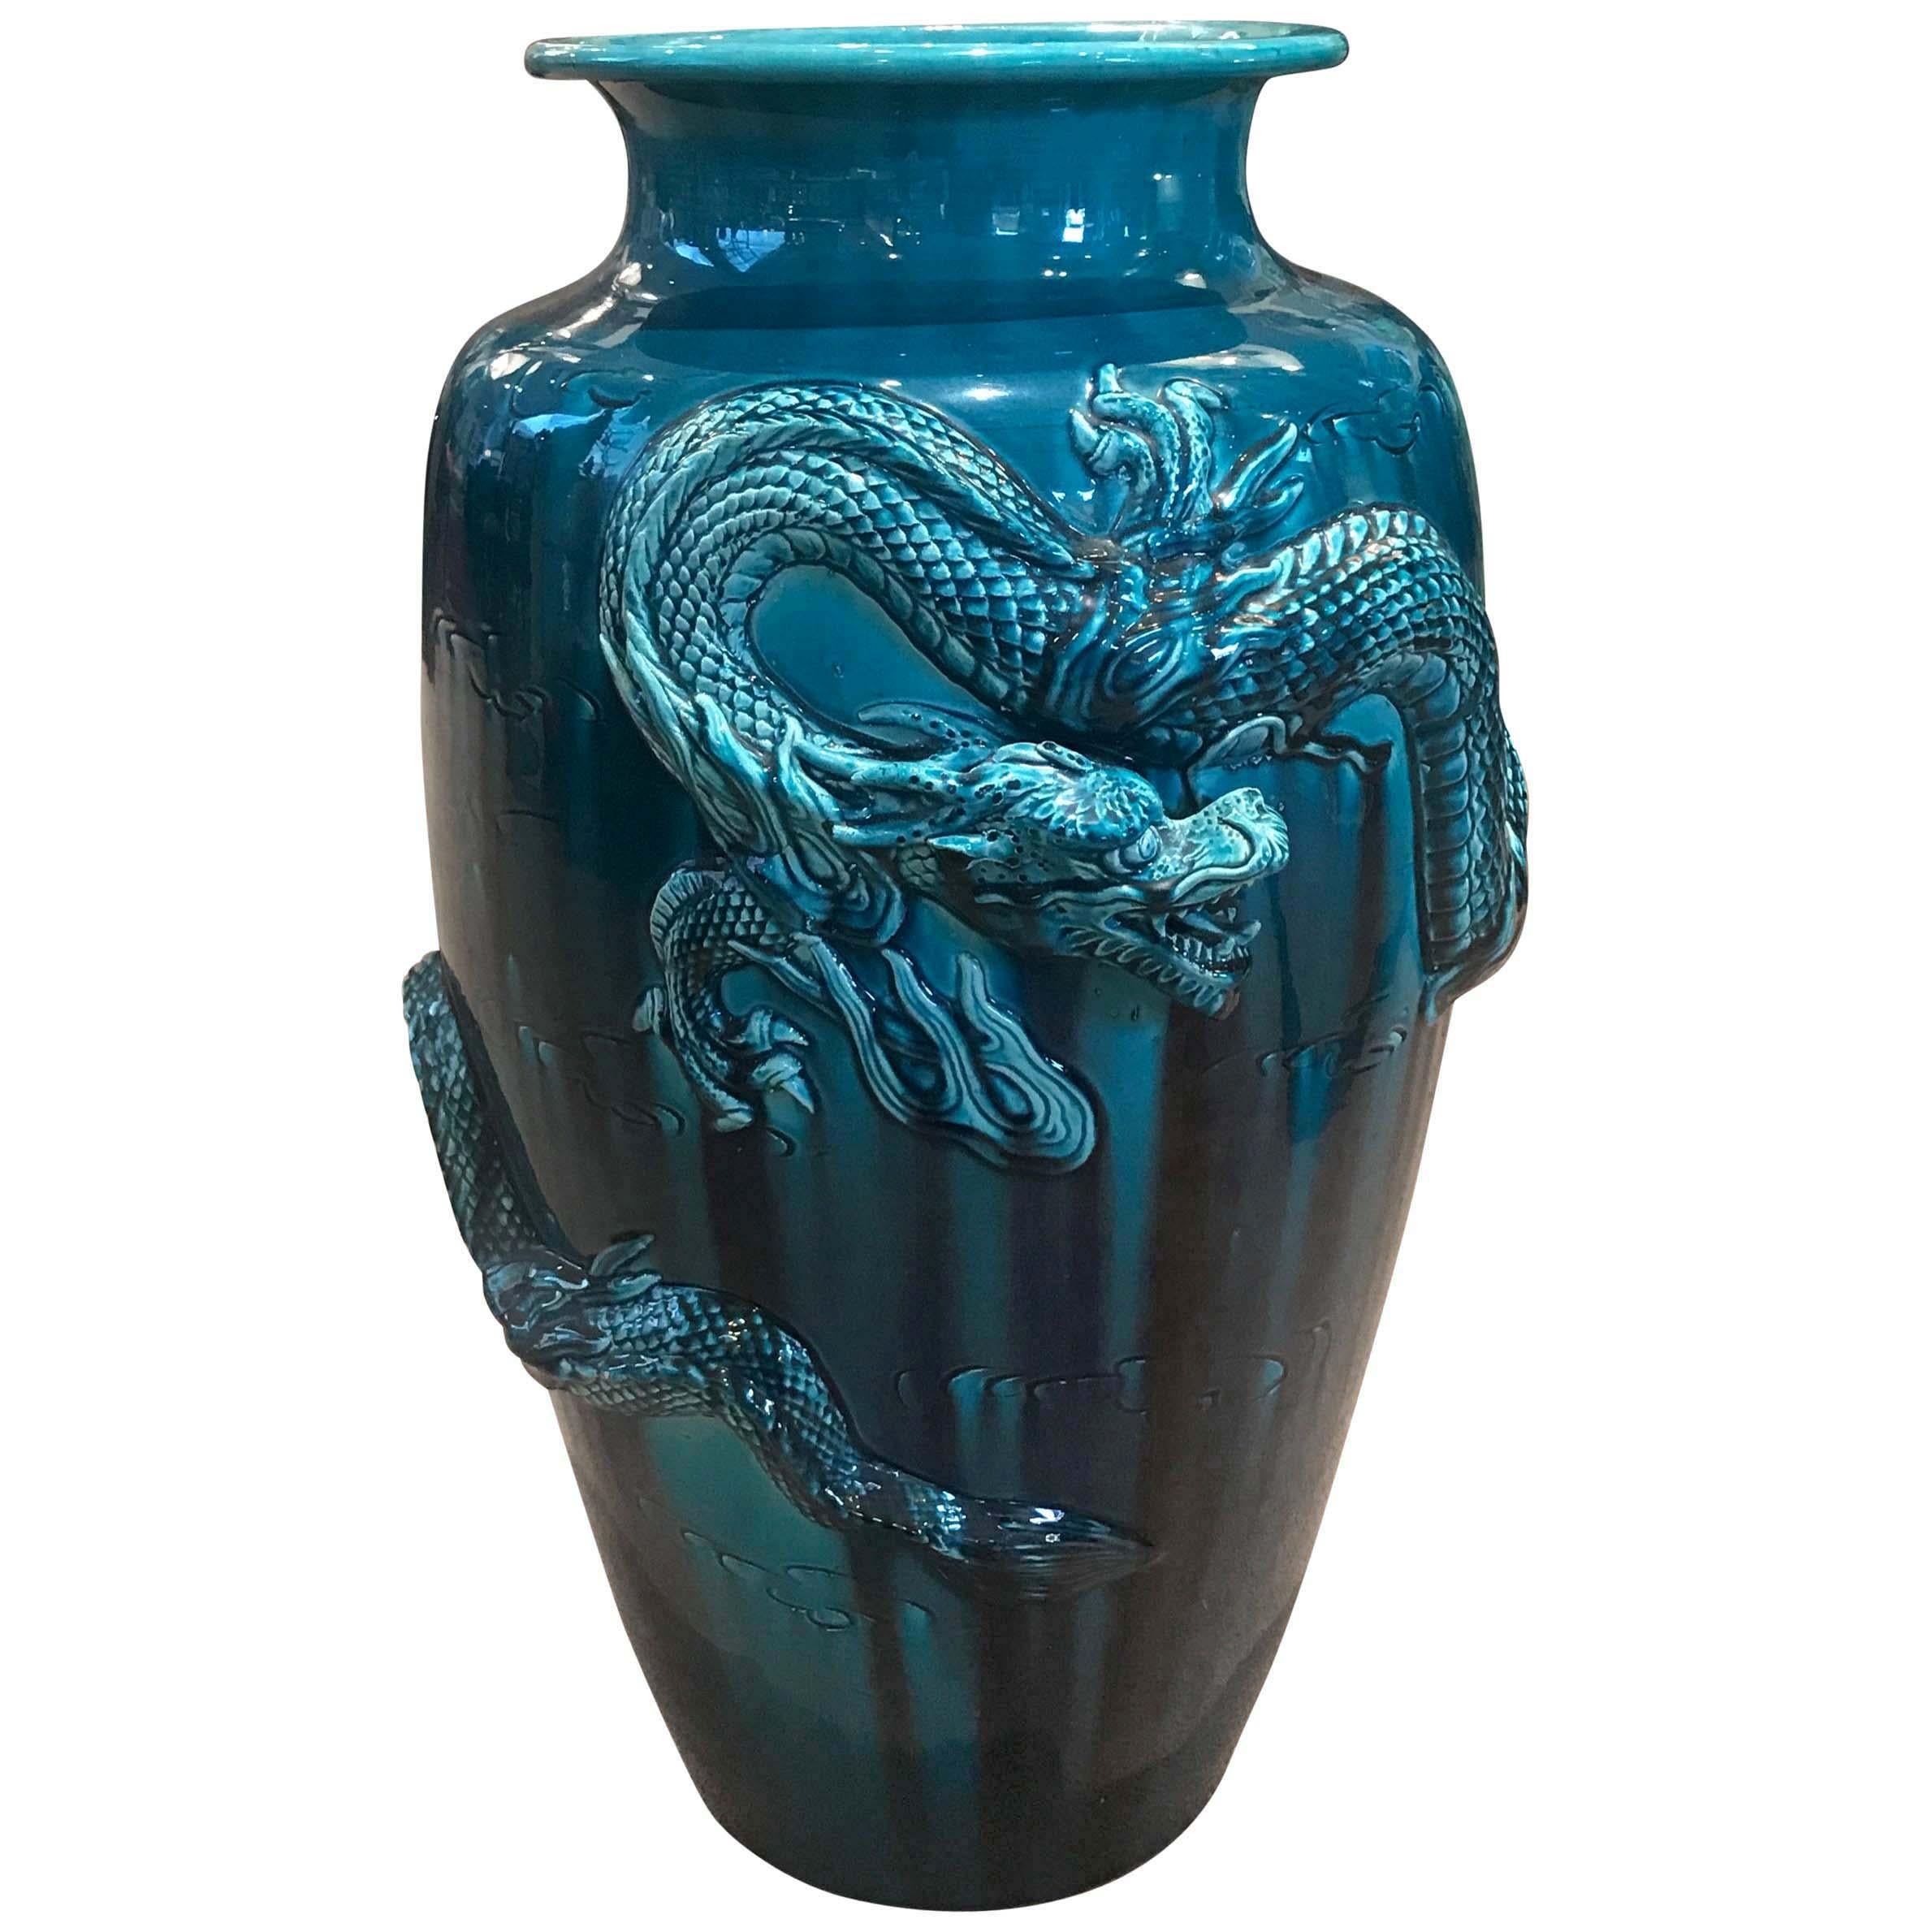 Large Antique Japanese Vase with Teal Flambe Glaze and Dragon